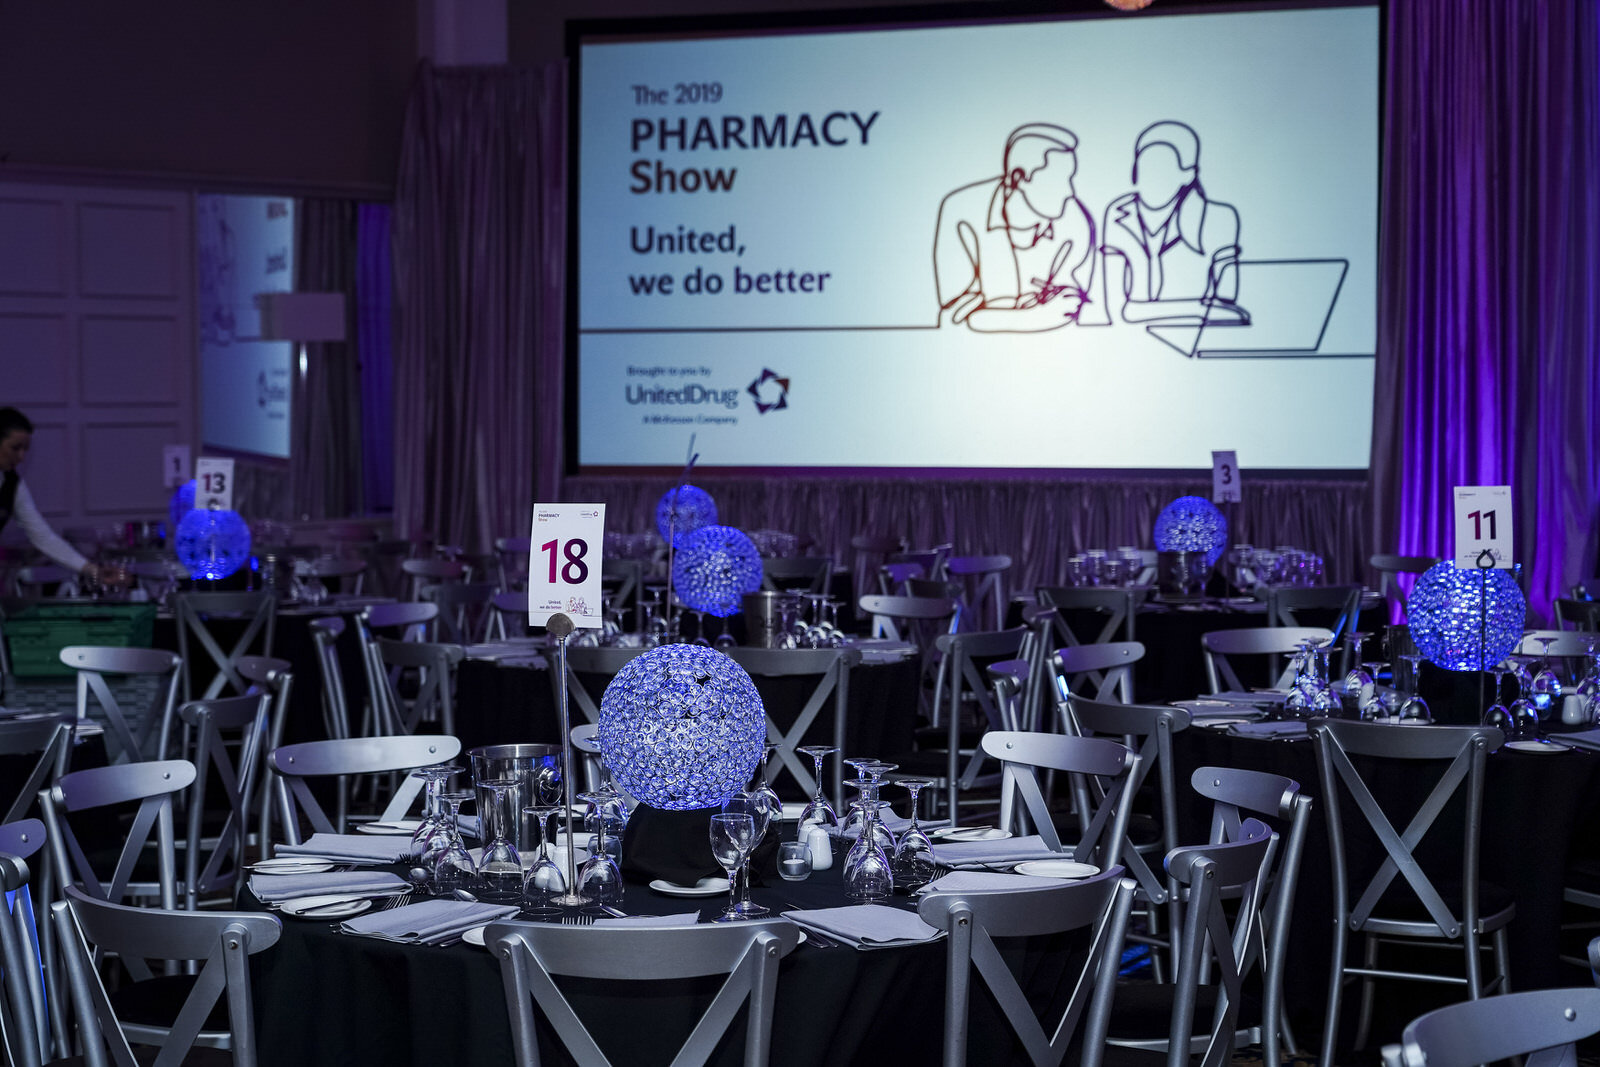  Pharmacy show exhibition conference and dinner photography by Roger Kenny. Exhibition at the Aviva Stadium Dublin Ireland. 